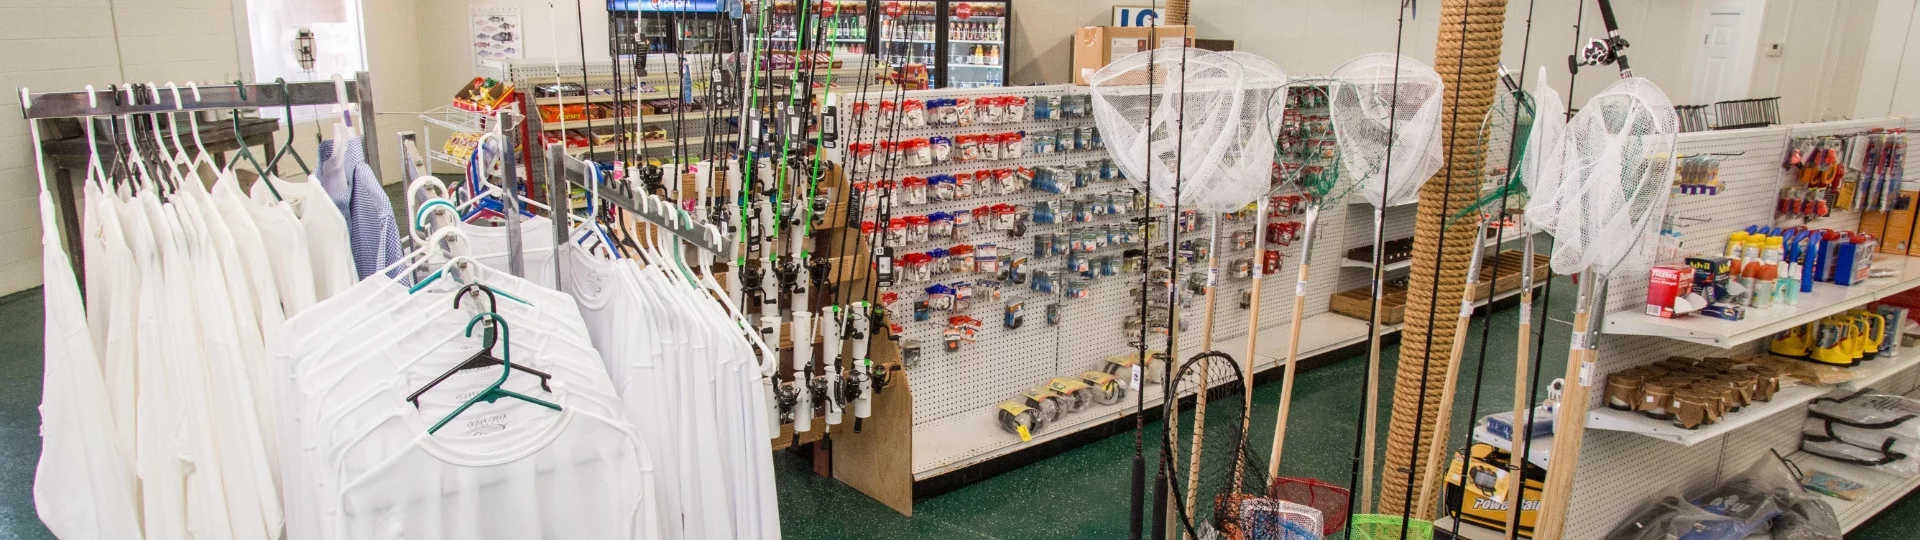 Beach Road Bait & Tackle: Fishing Store in Lake George, NY